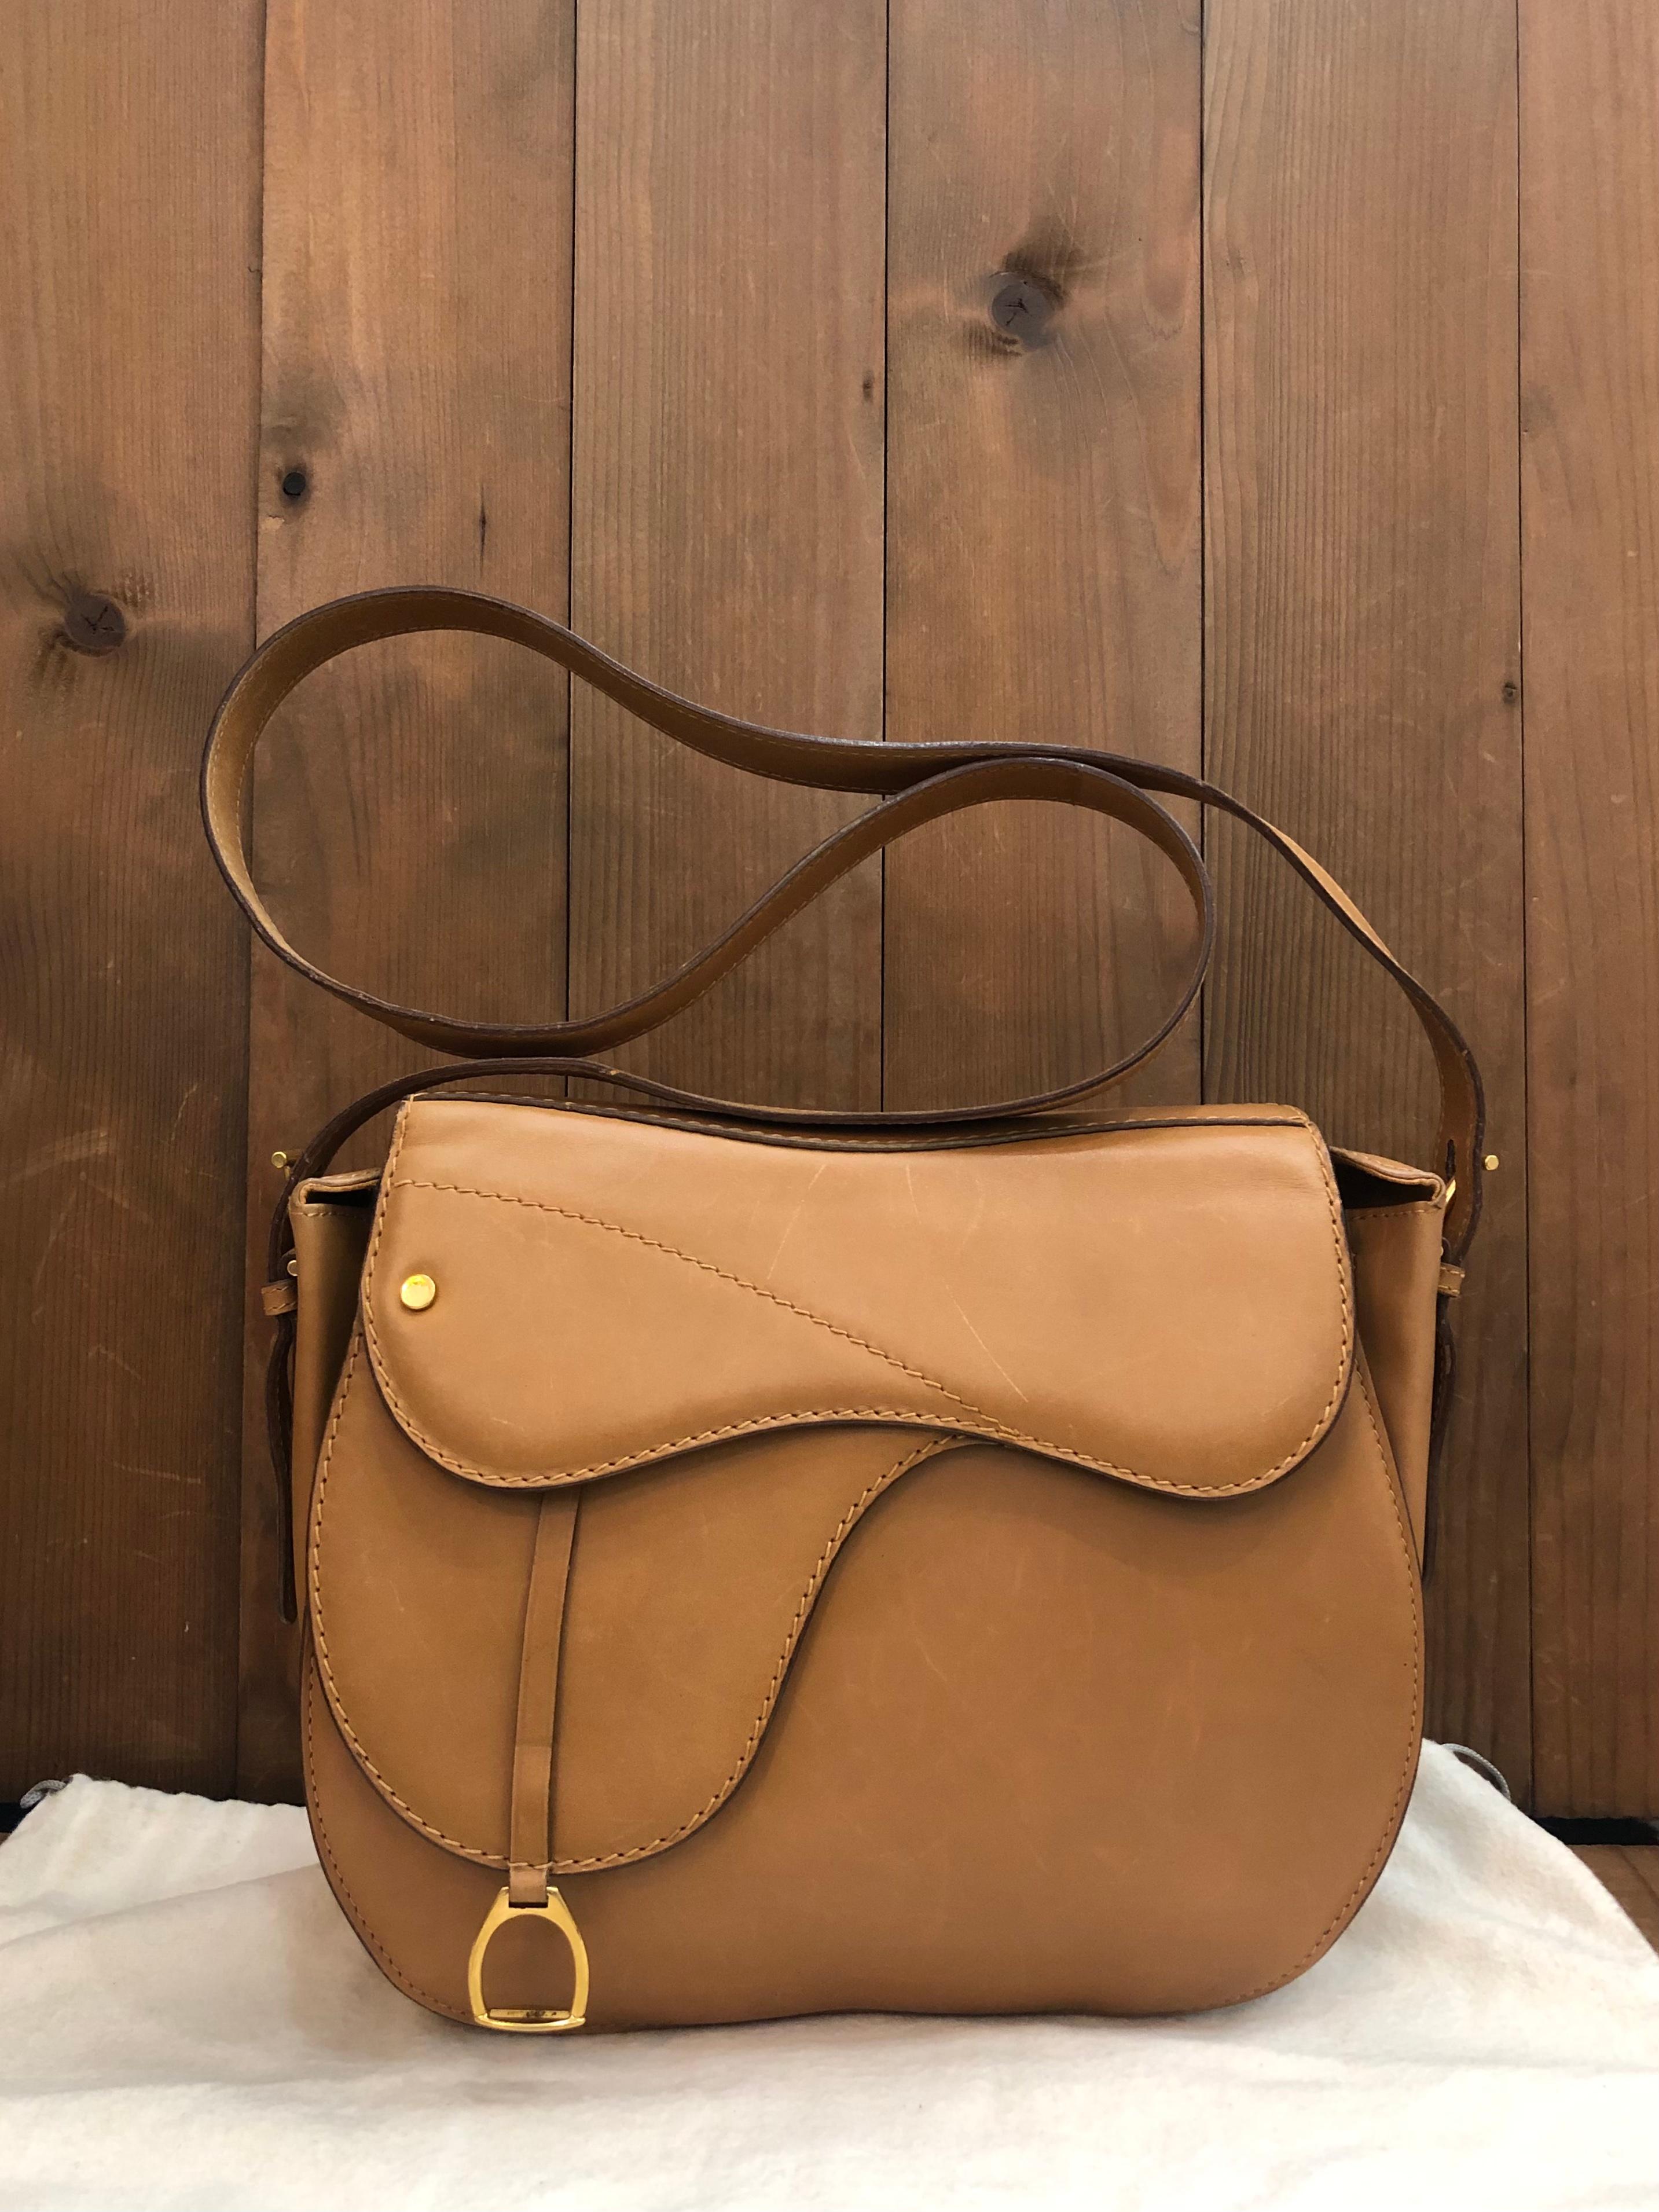 This 1990s vintage GUCCI saddle bag is crafted of smooth calfskin leather in camel featuring gold toned hardware. Front magnetic snap closure opens to a leather interior featuring a zippered pocket. Made in Italy. Measures approximately 9 x 9 x 3